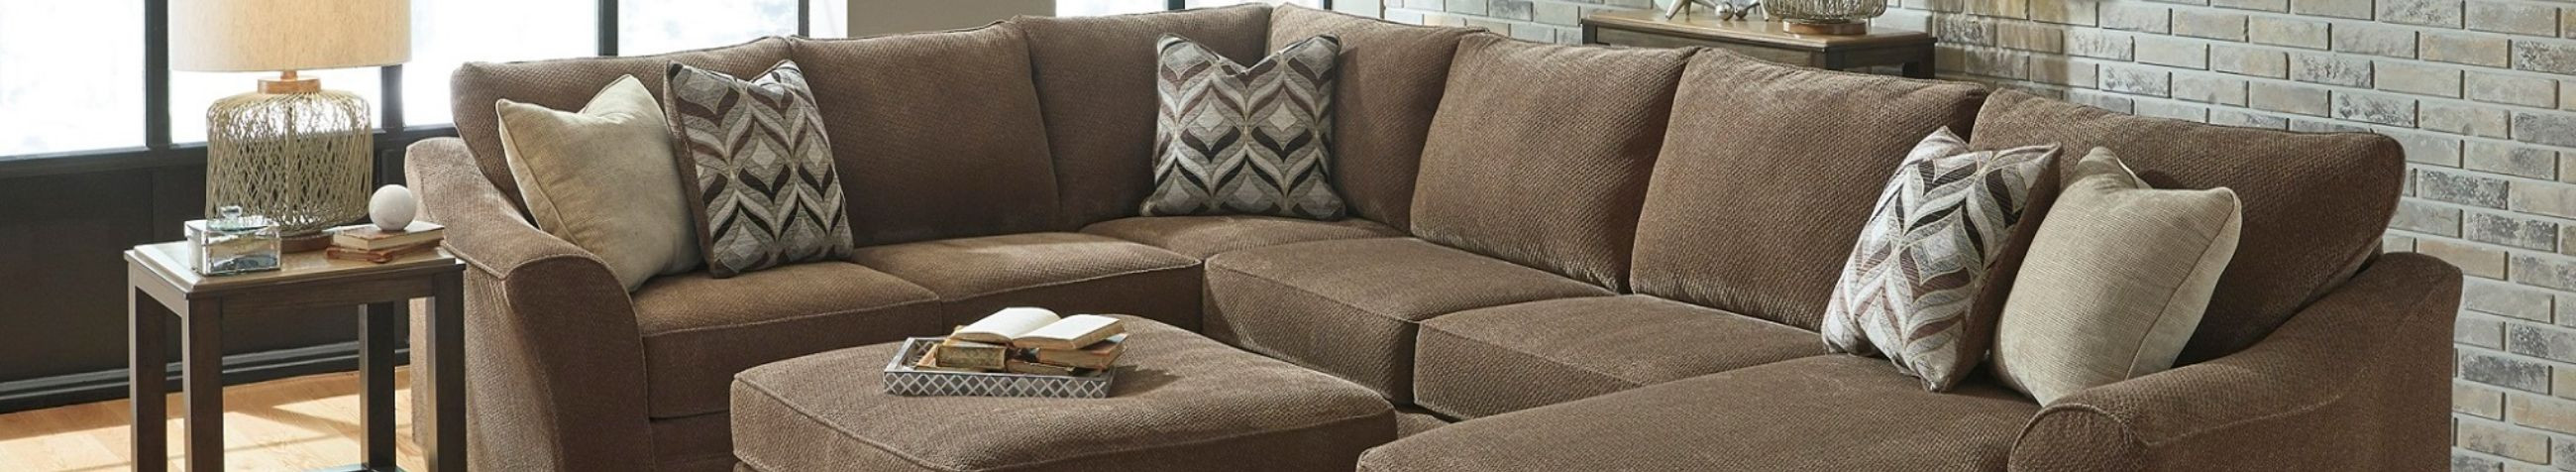 We offer an extensive range of high-quality furniture and home accessories, including sofas, tables, storage solutions, and outdoor furnishings, complemented by a variety of decorative items to complete the look of any space.